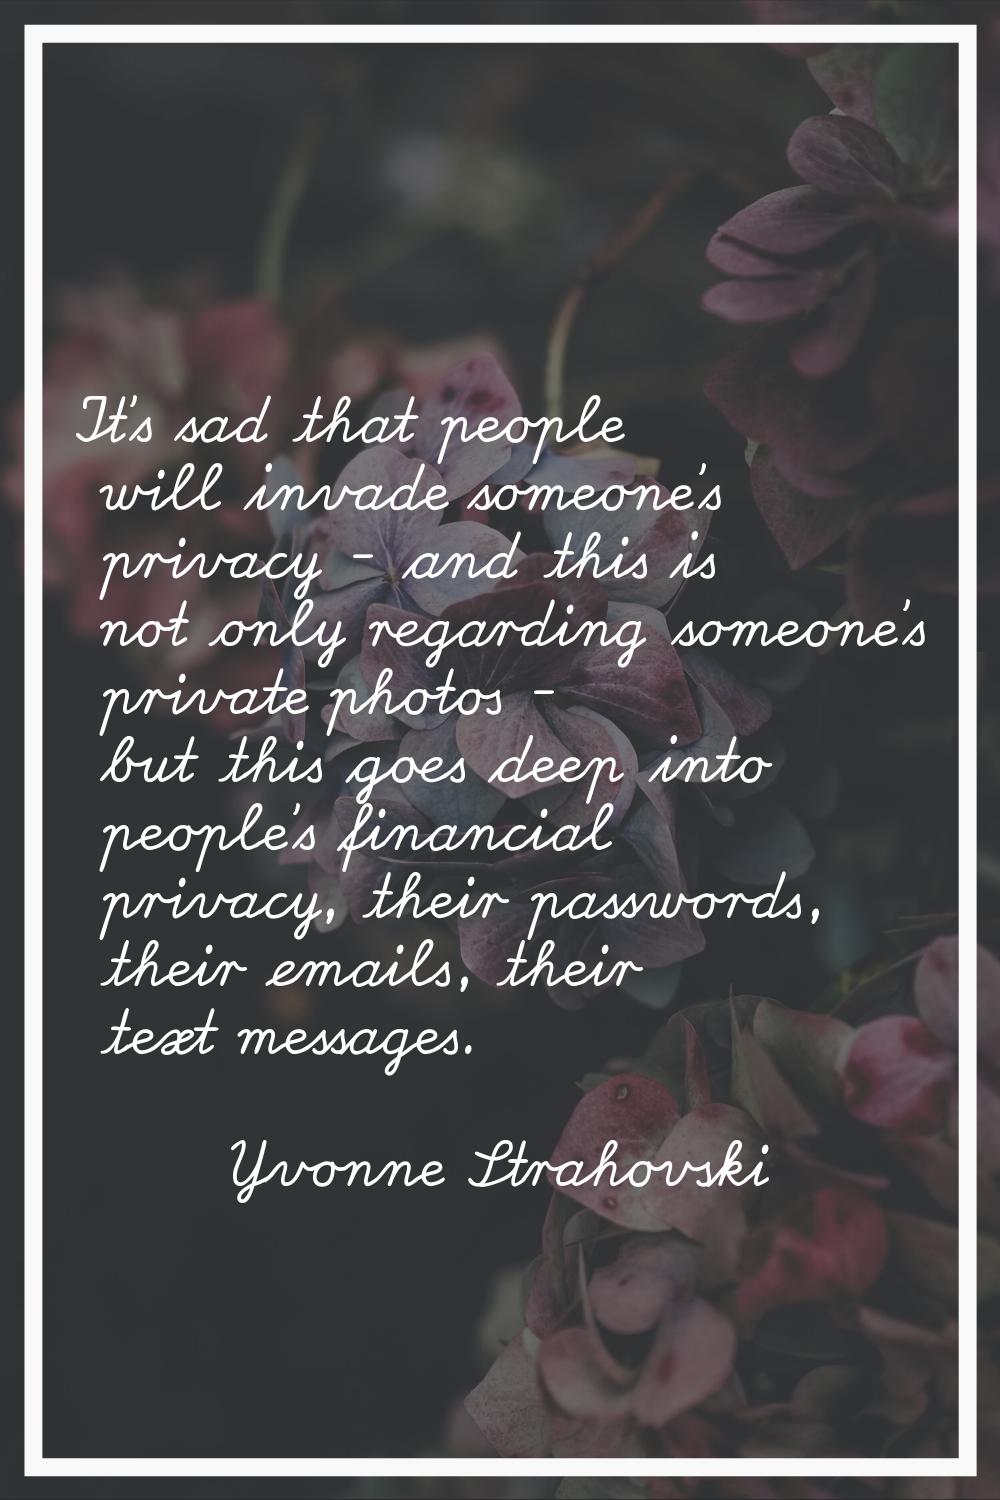 It's sad that people will invade someone's privacy - and this is not only regarding someone's priva